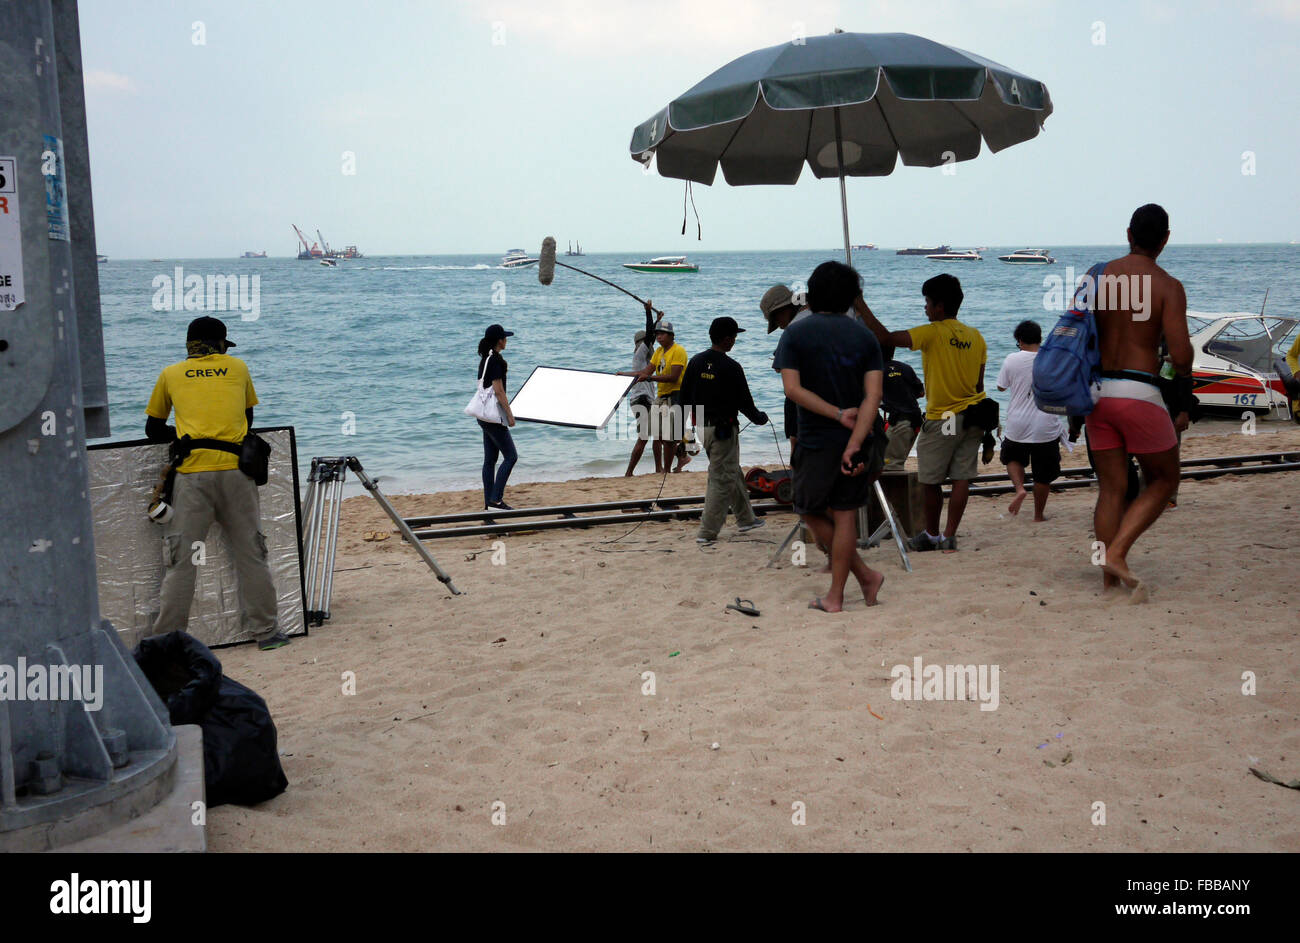 A scene from a Thai soap opera being filmed on Pattaya Beach Thailand Stock Photo